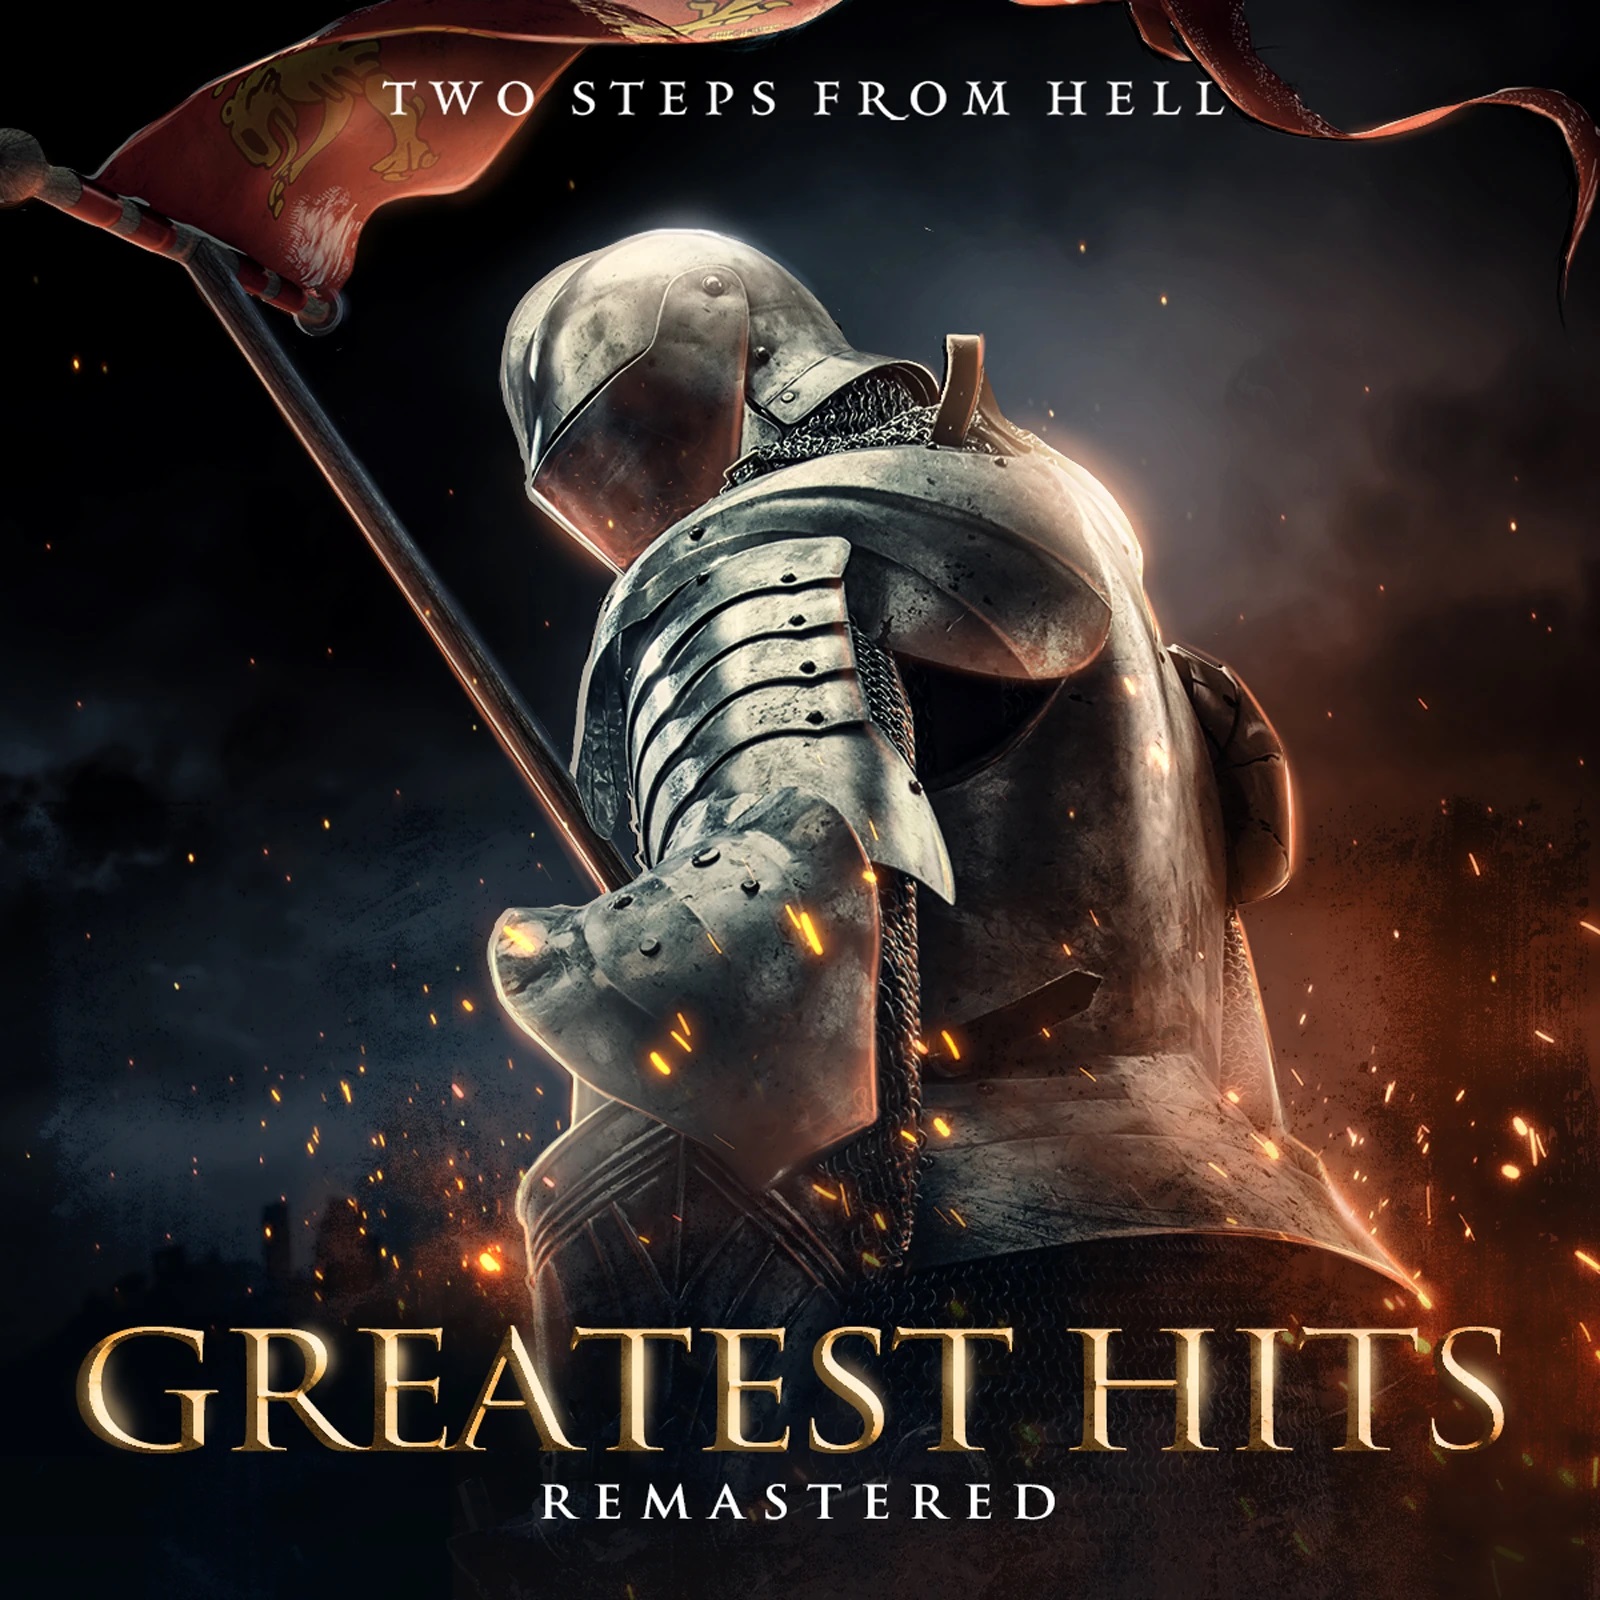 Two Steps From Hell – Greatest Hits: Remastered (2020) [FLAC 24bit/48kHz]